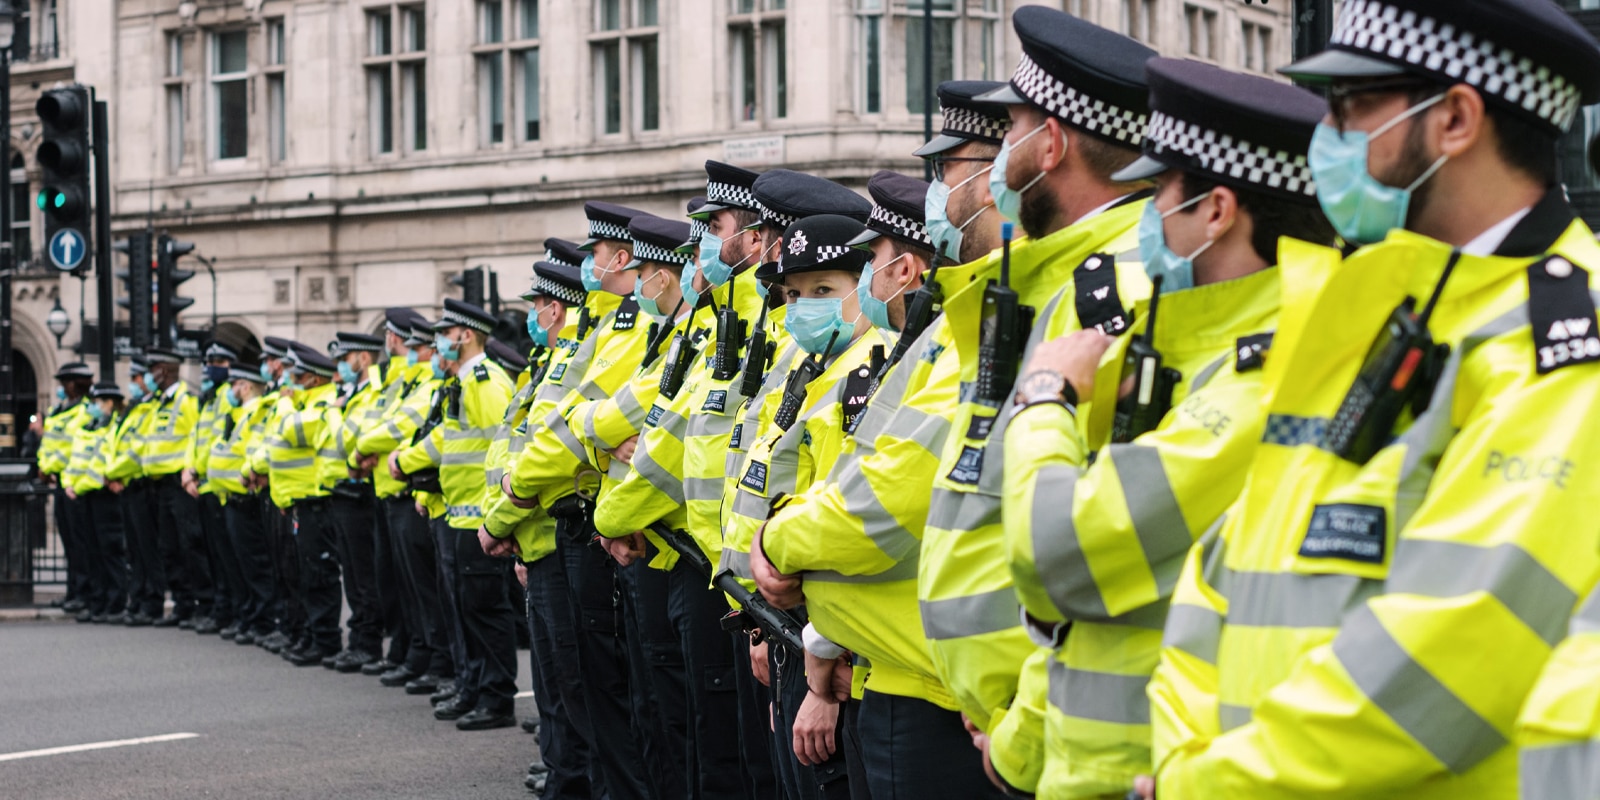 An image of the police force lined up with masks on their faces